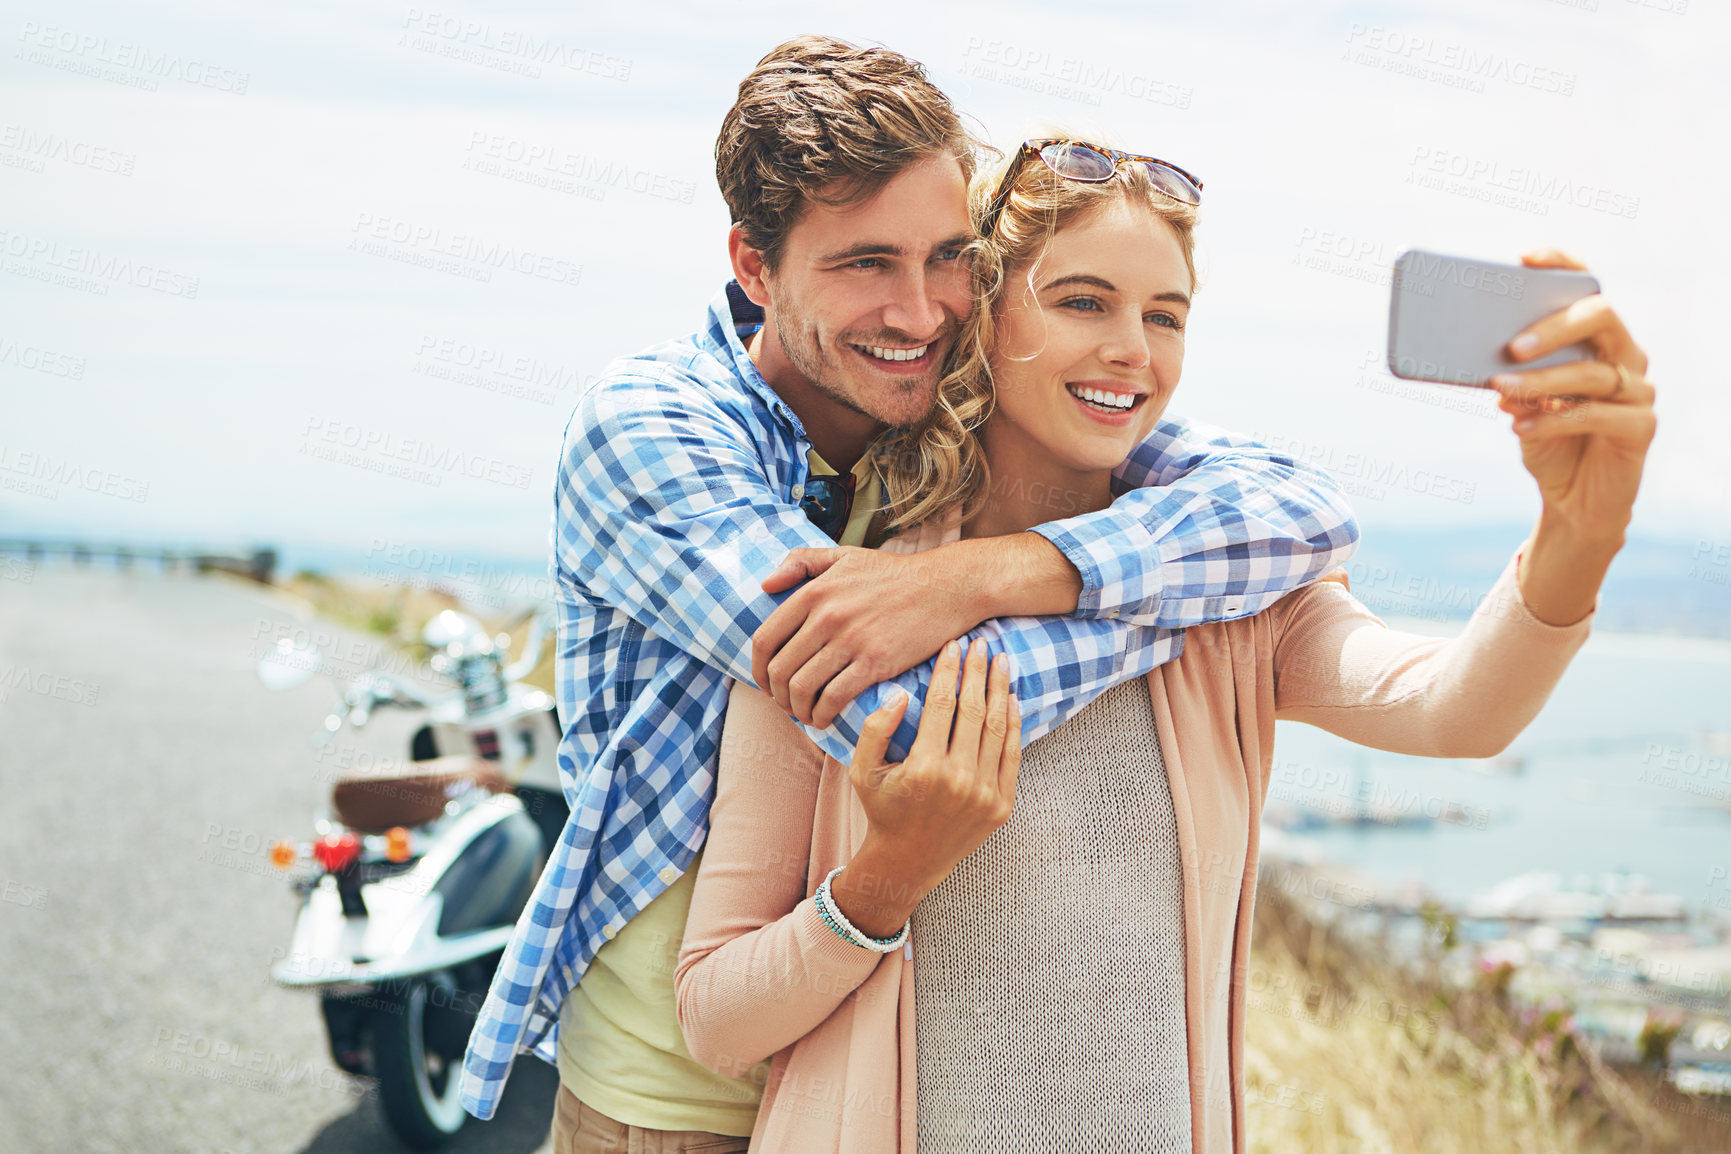 Buy stock photo Shot of a couple taking a selfie outdoors